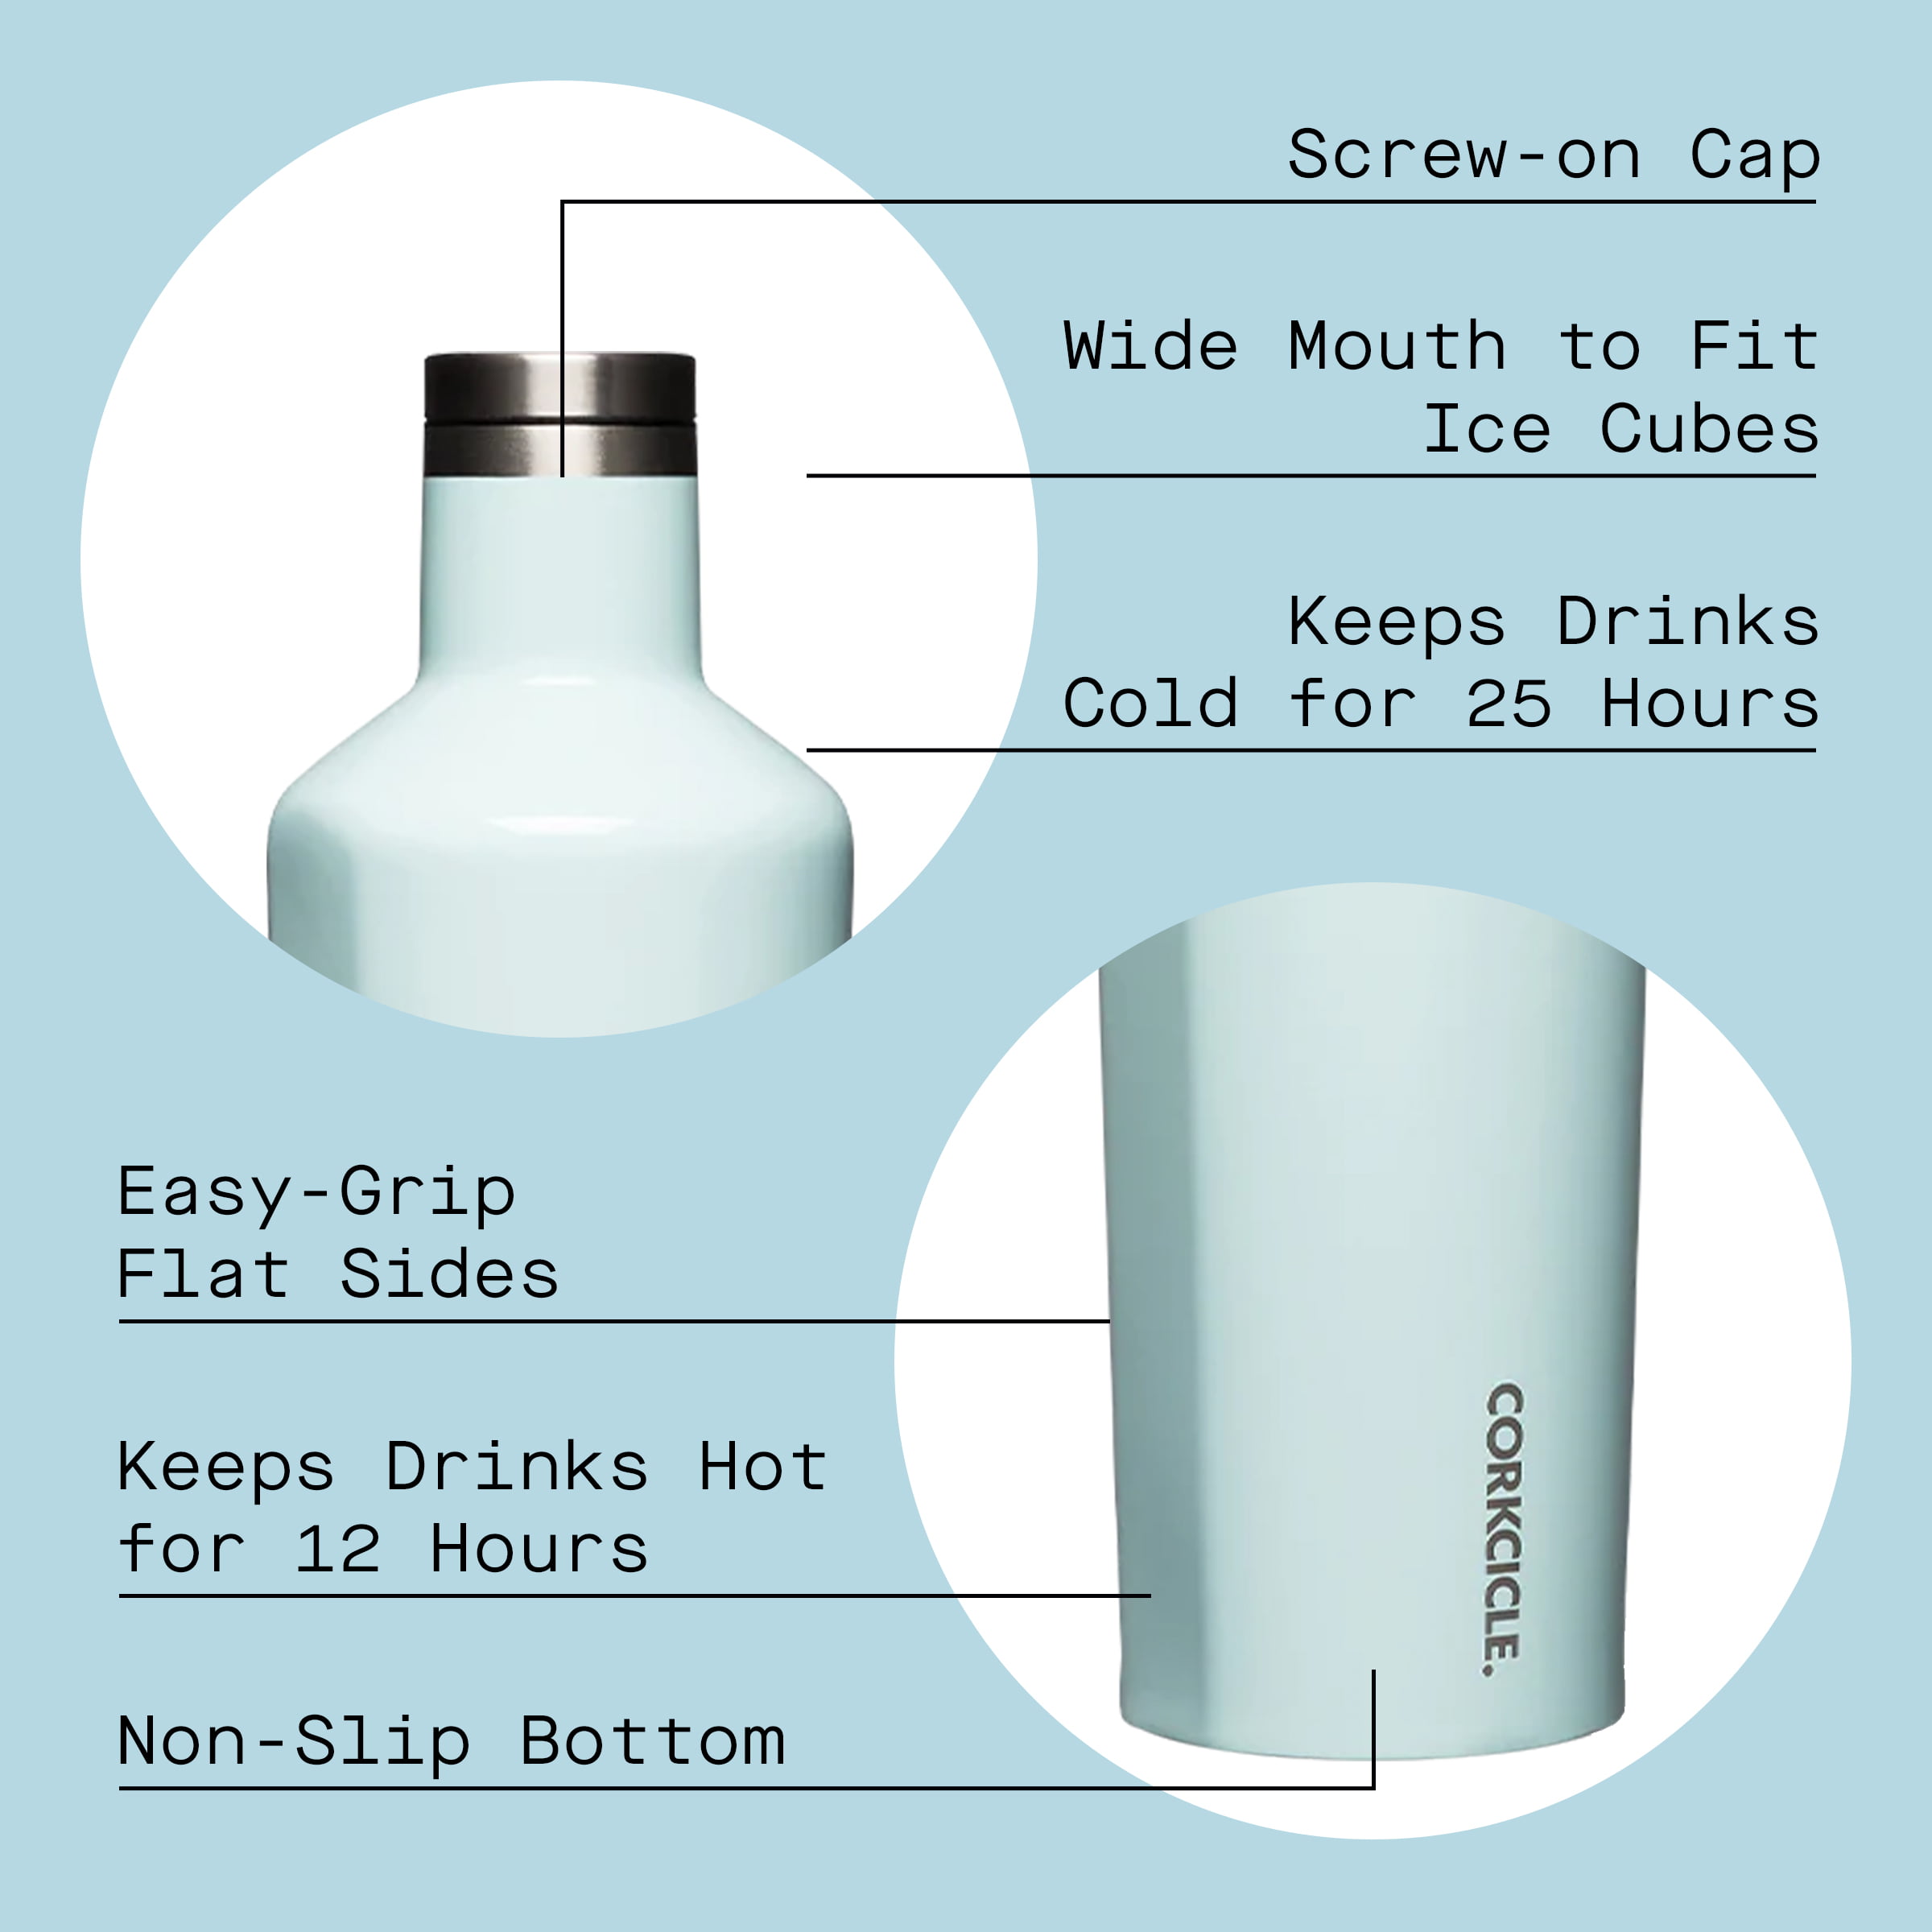 CORKCICLE Classic Canteen 25 oz. Turquoise Insulated Water Bottle.